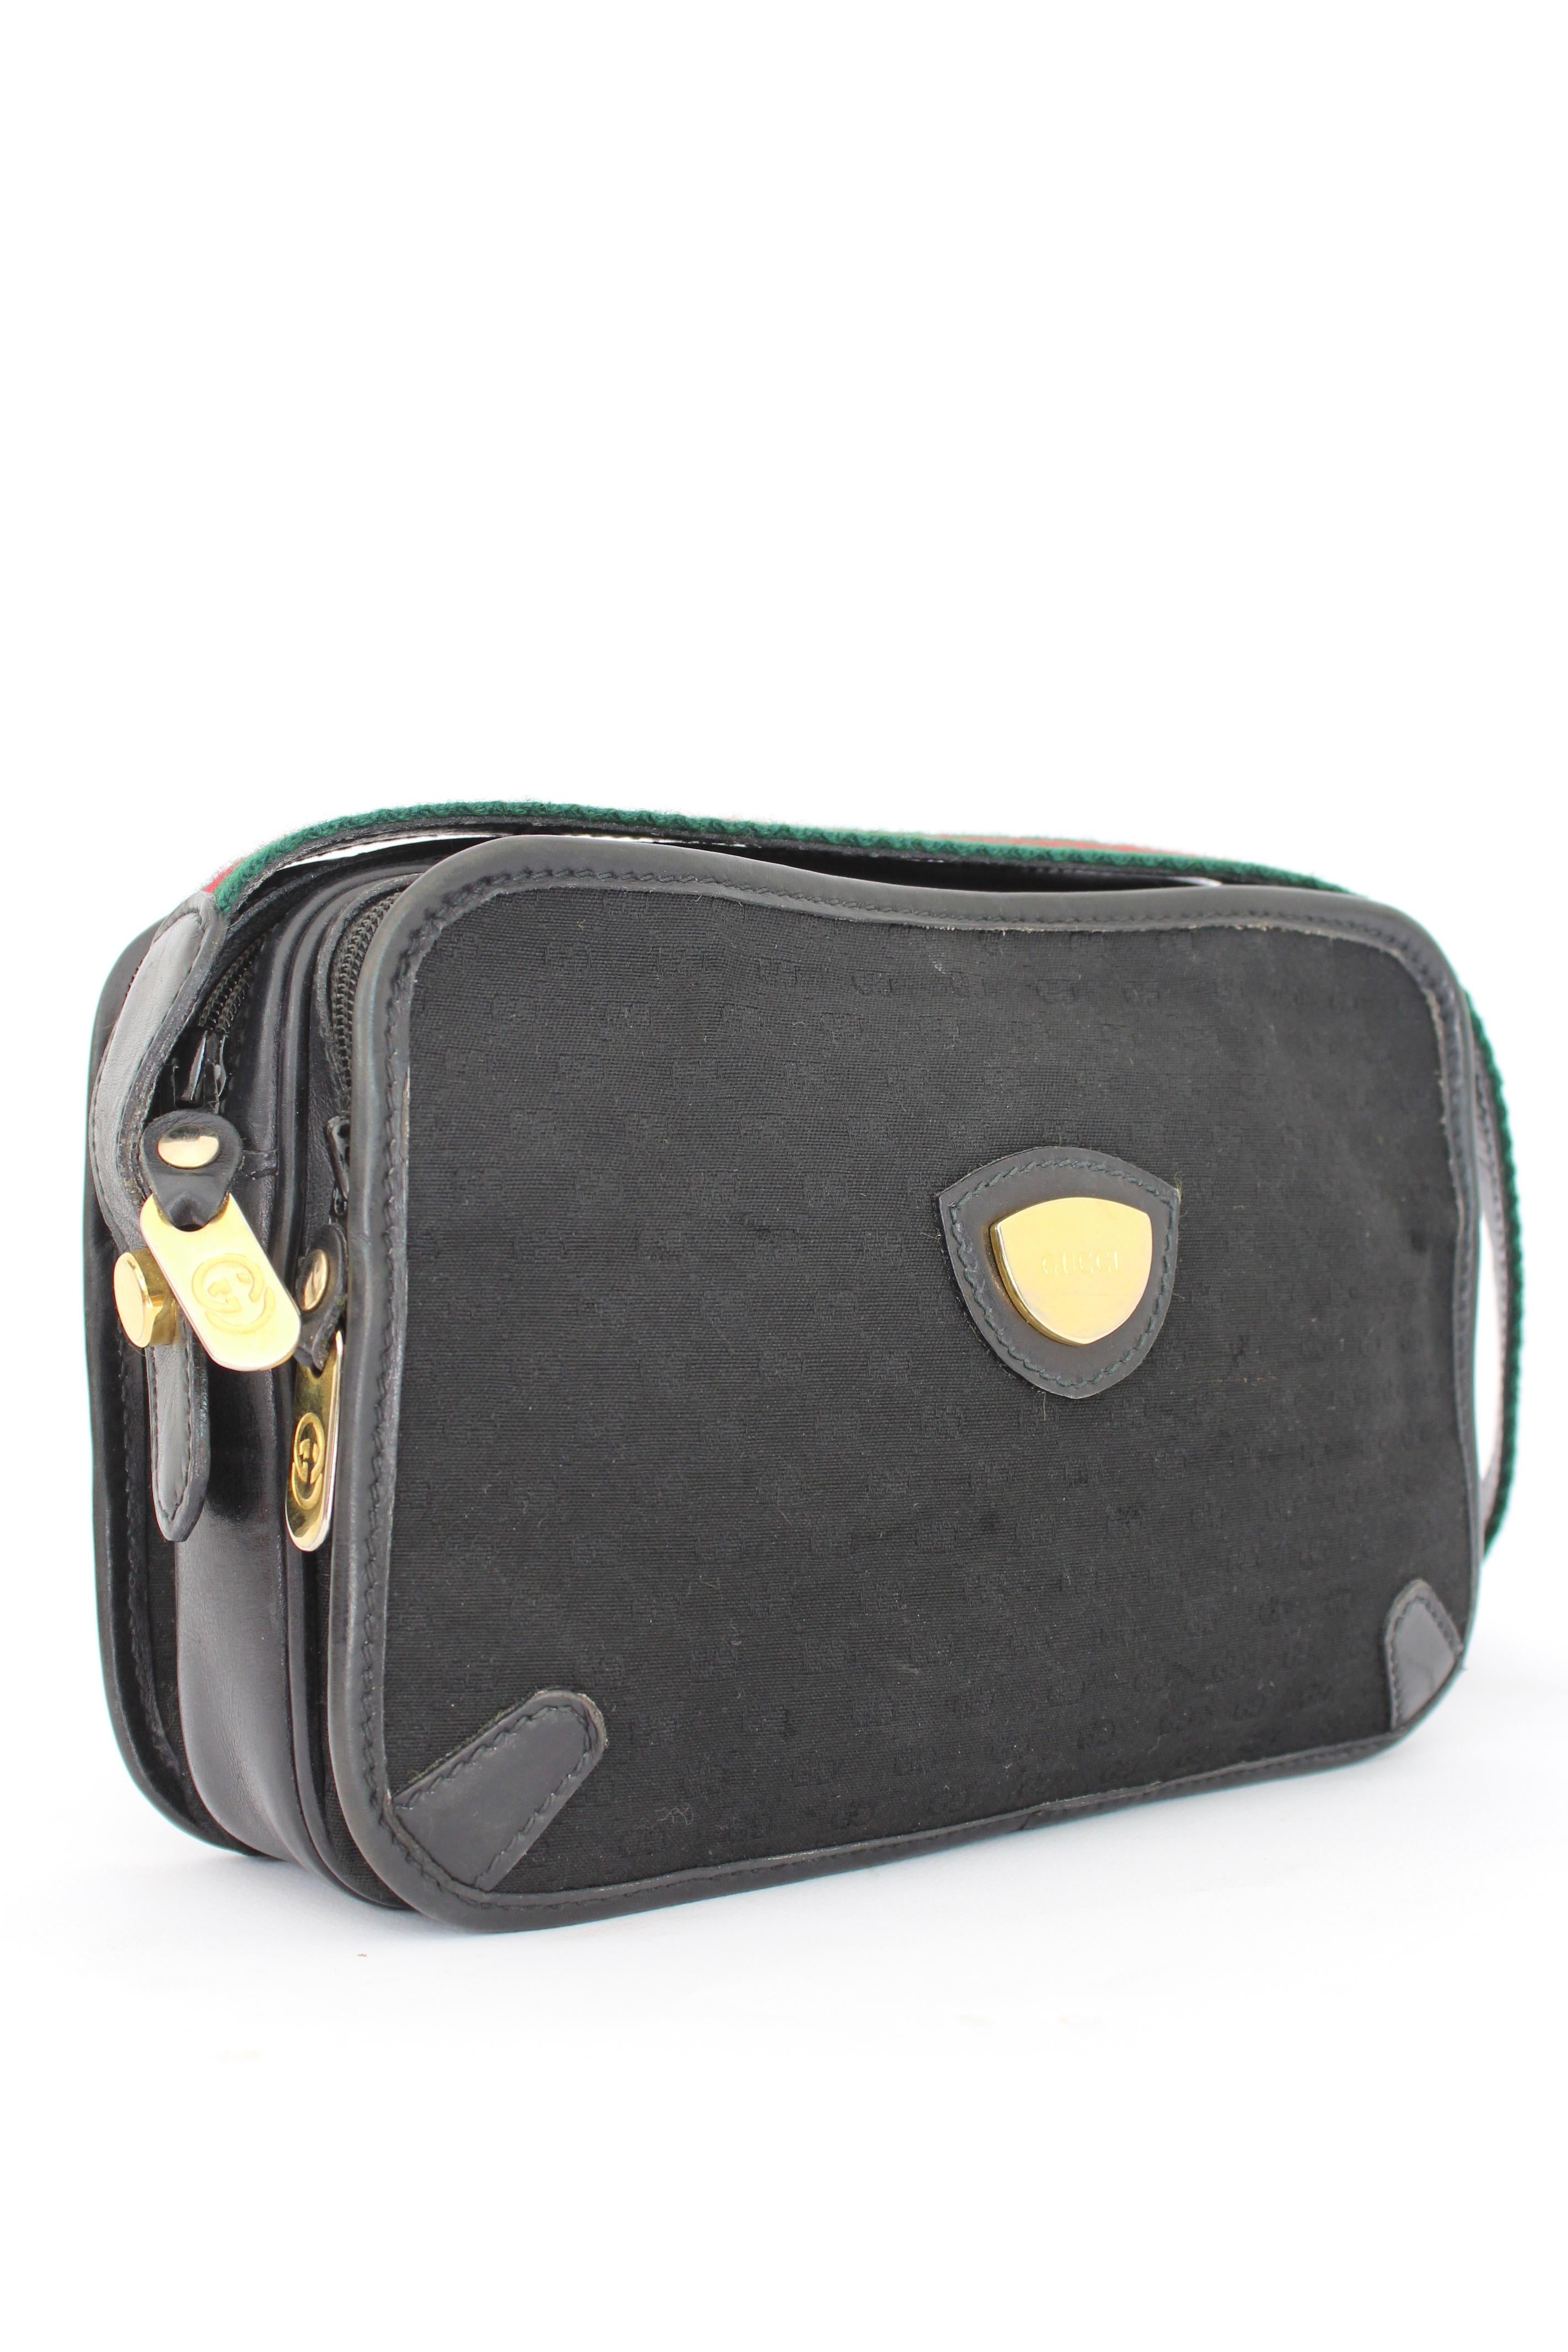 Gucci Black Leather Canvas Monogram Camera Bag In Good Condition In Brindisi, Bt